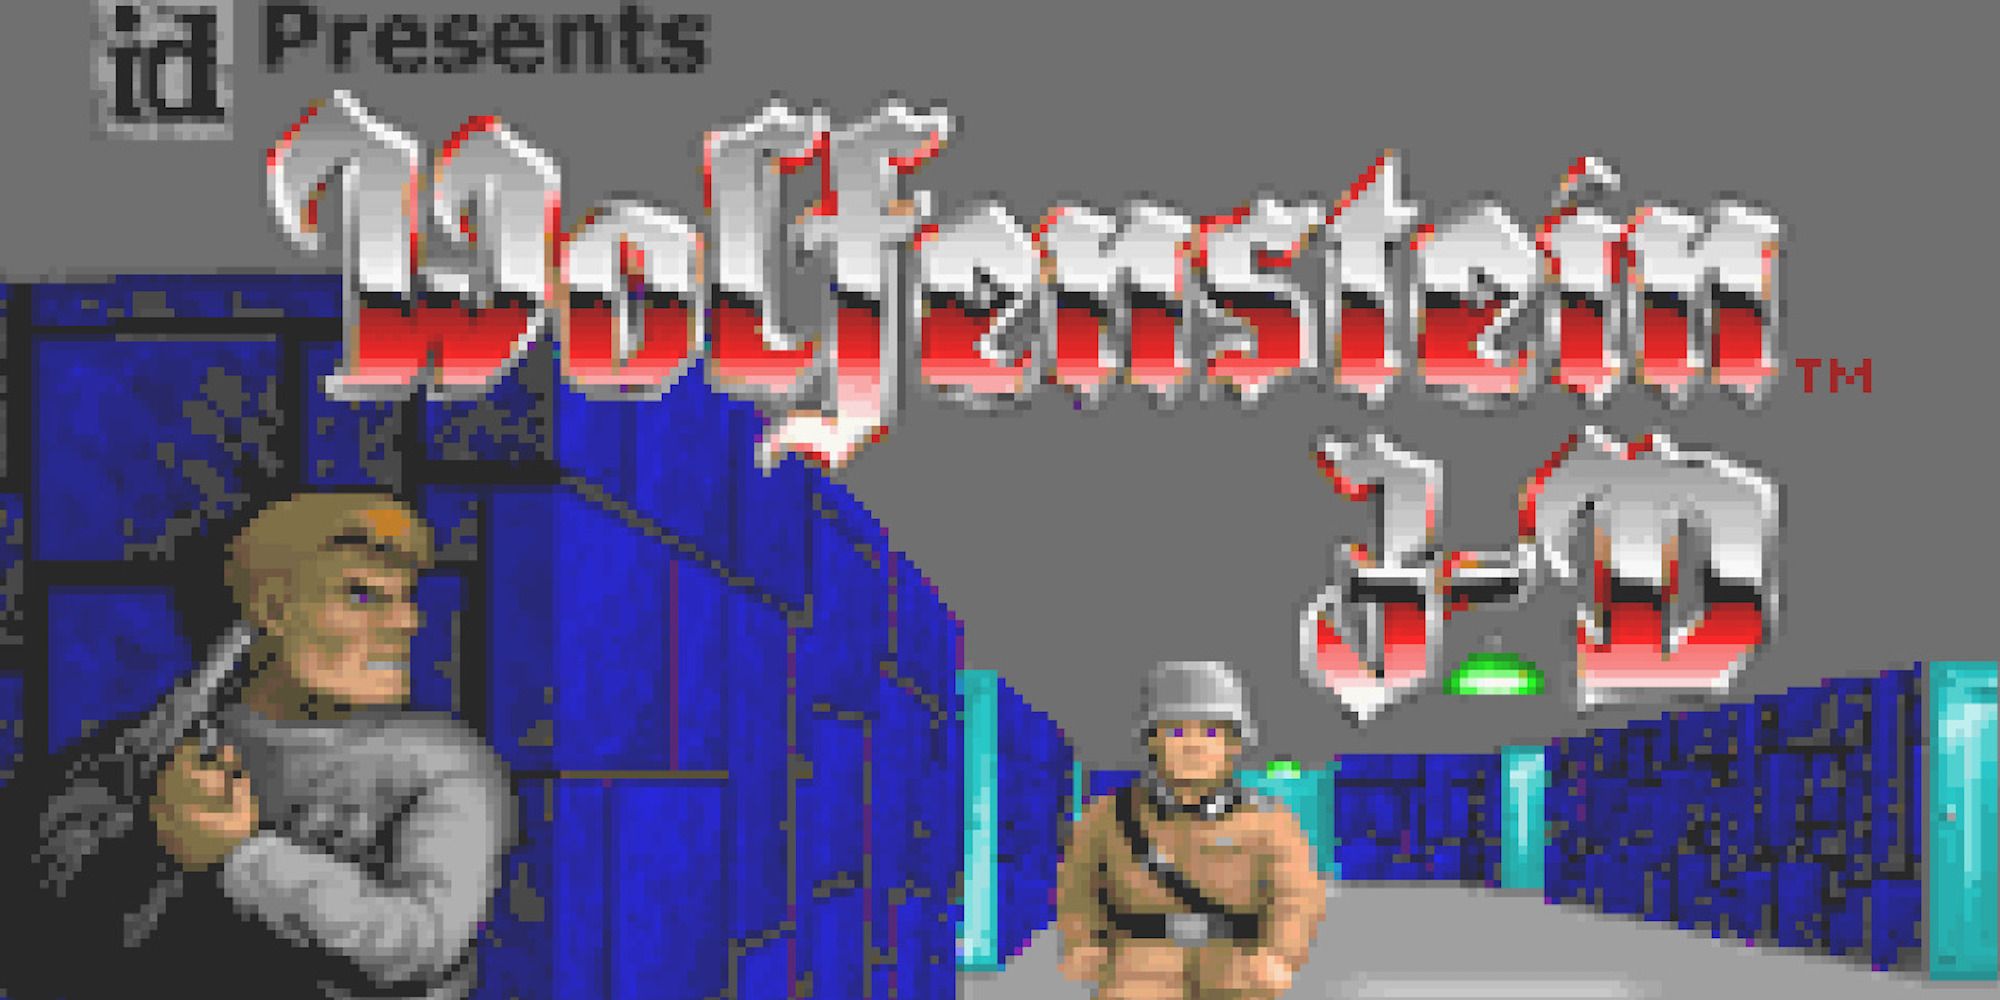 the title screen from Wolfenstein 3D